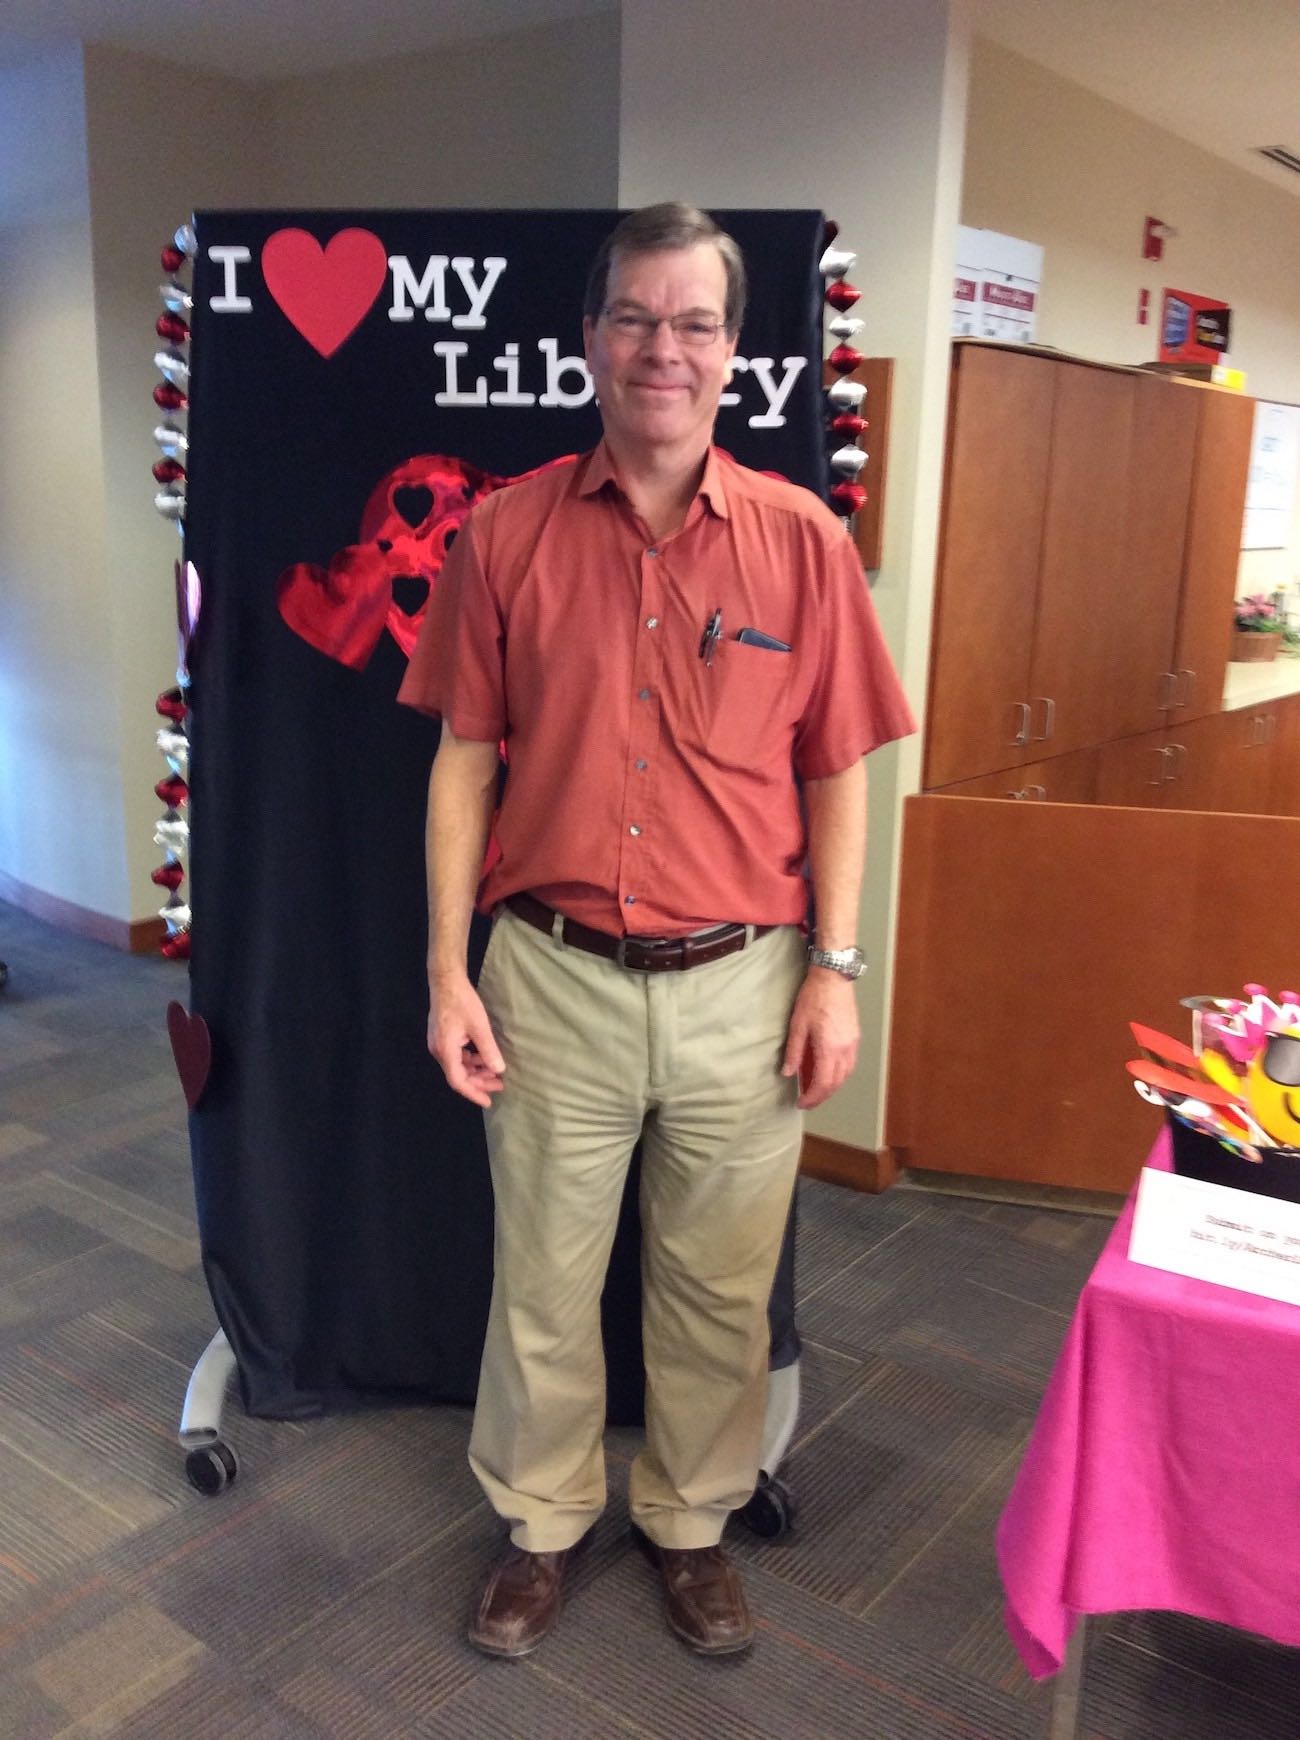 Librarian Charles Phelps stands in front of the I love my library backdrop smiling